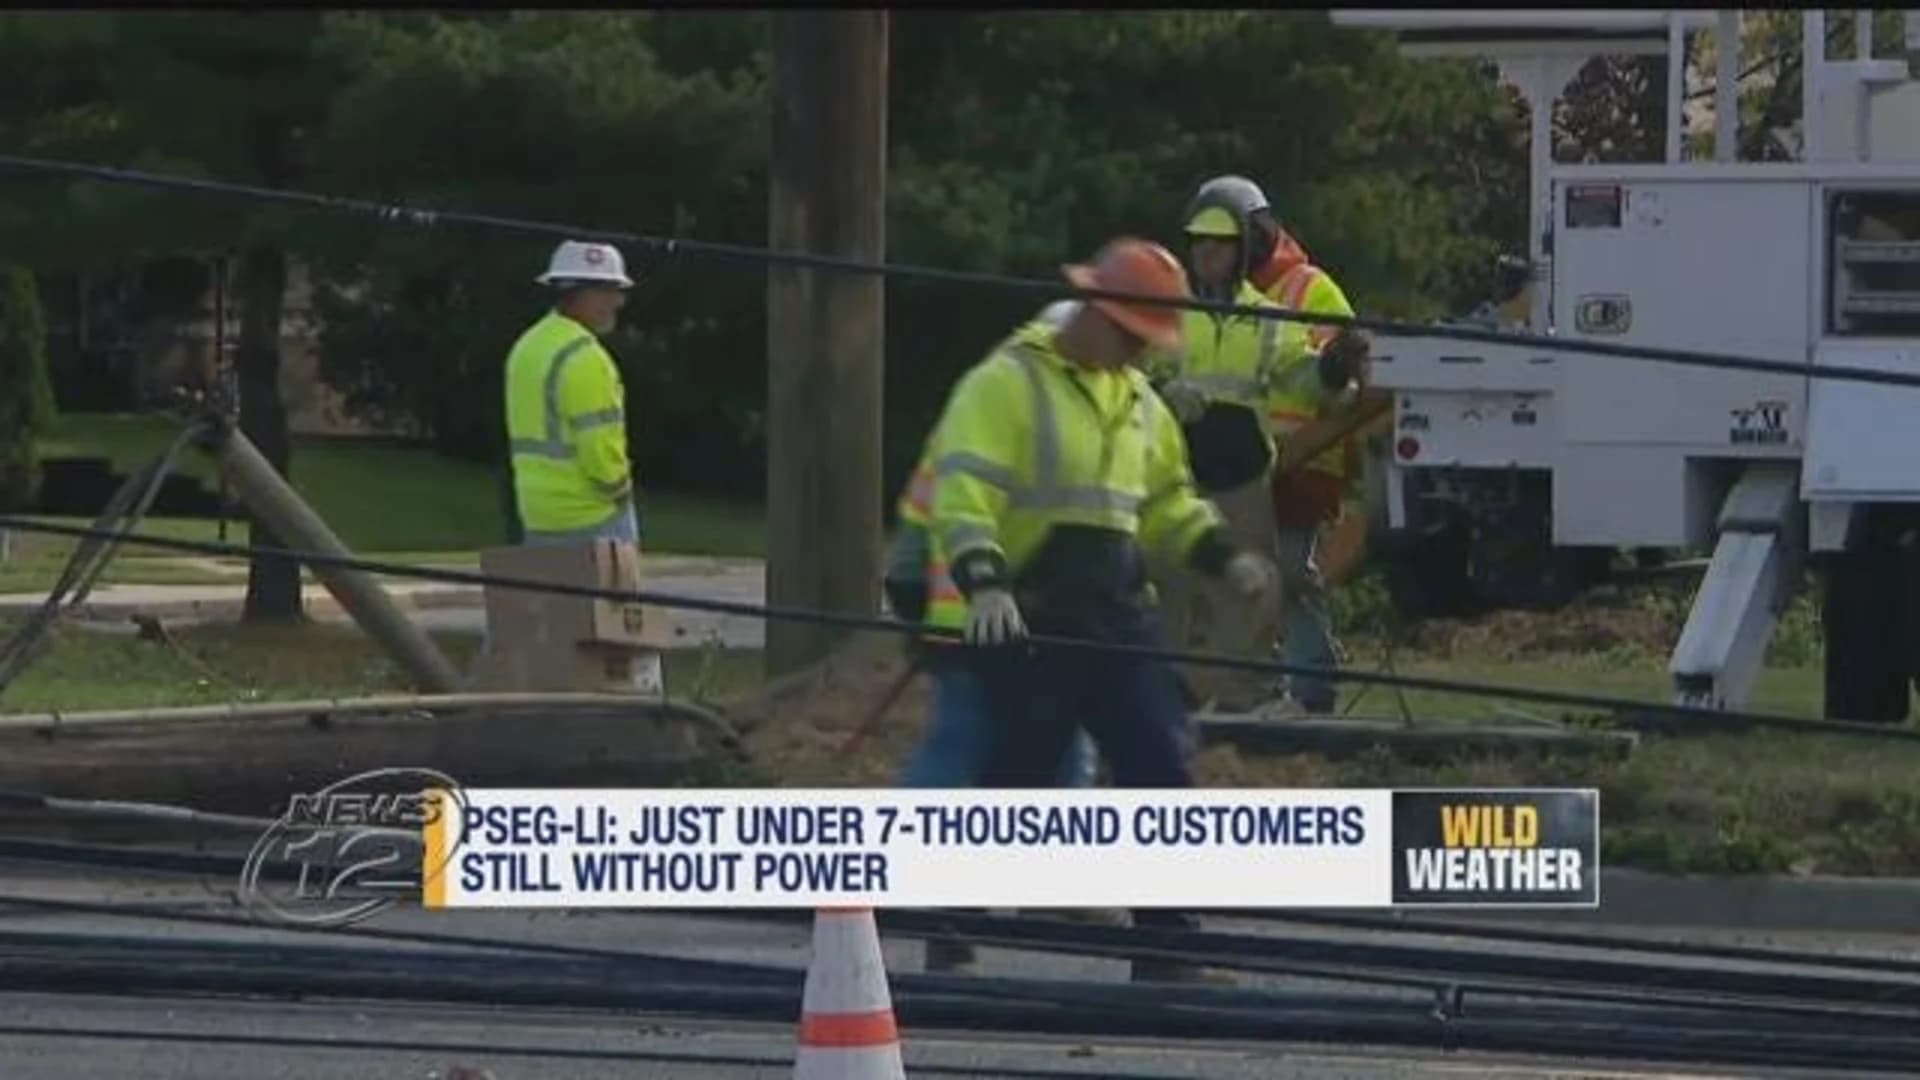 Long Islanders grow impatient with PSEG amid outage